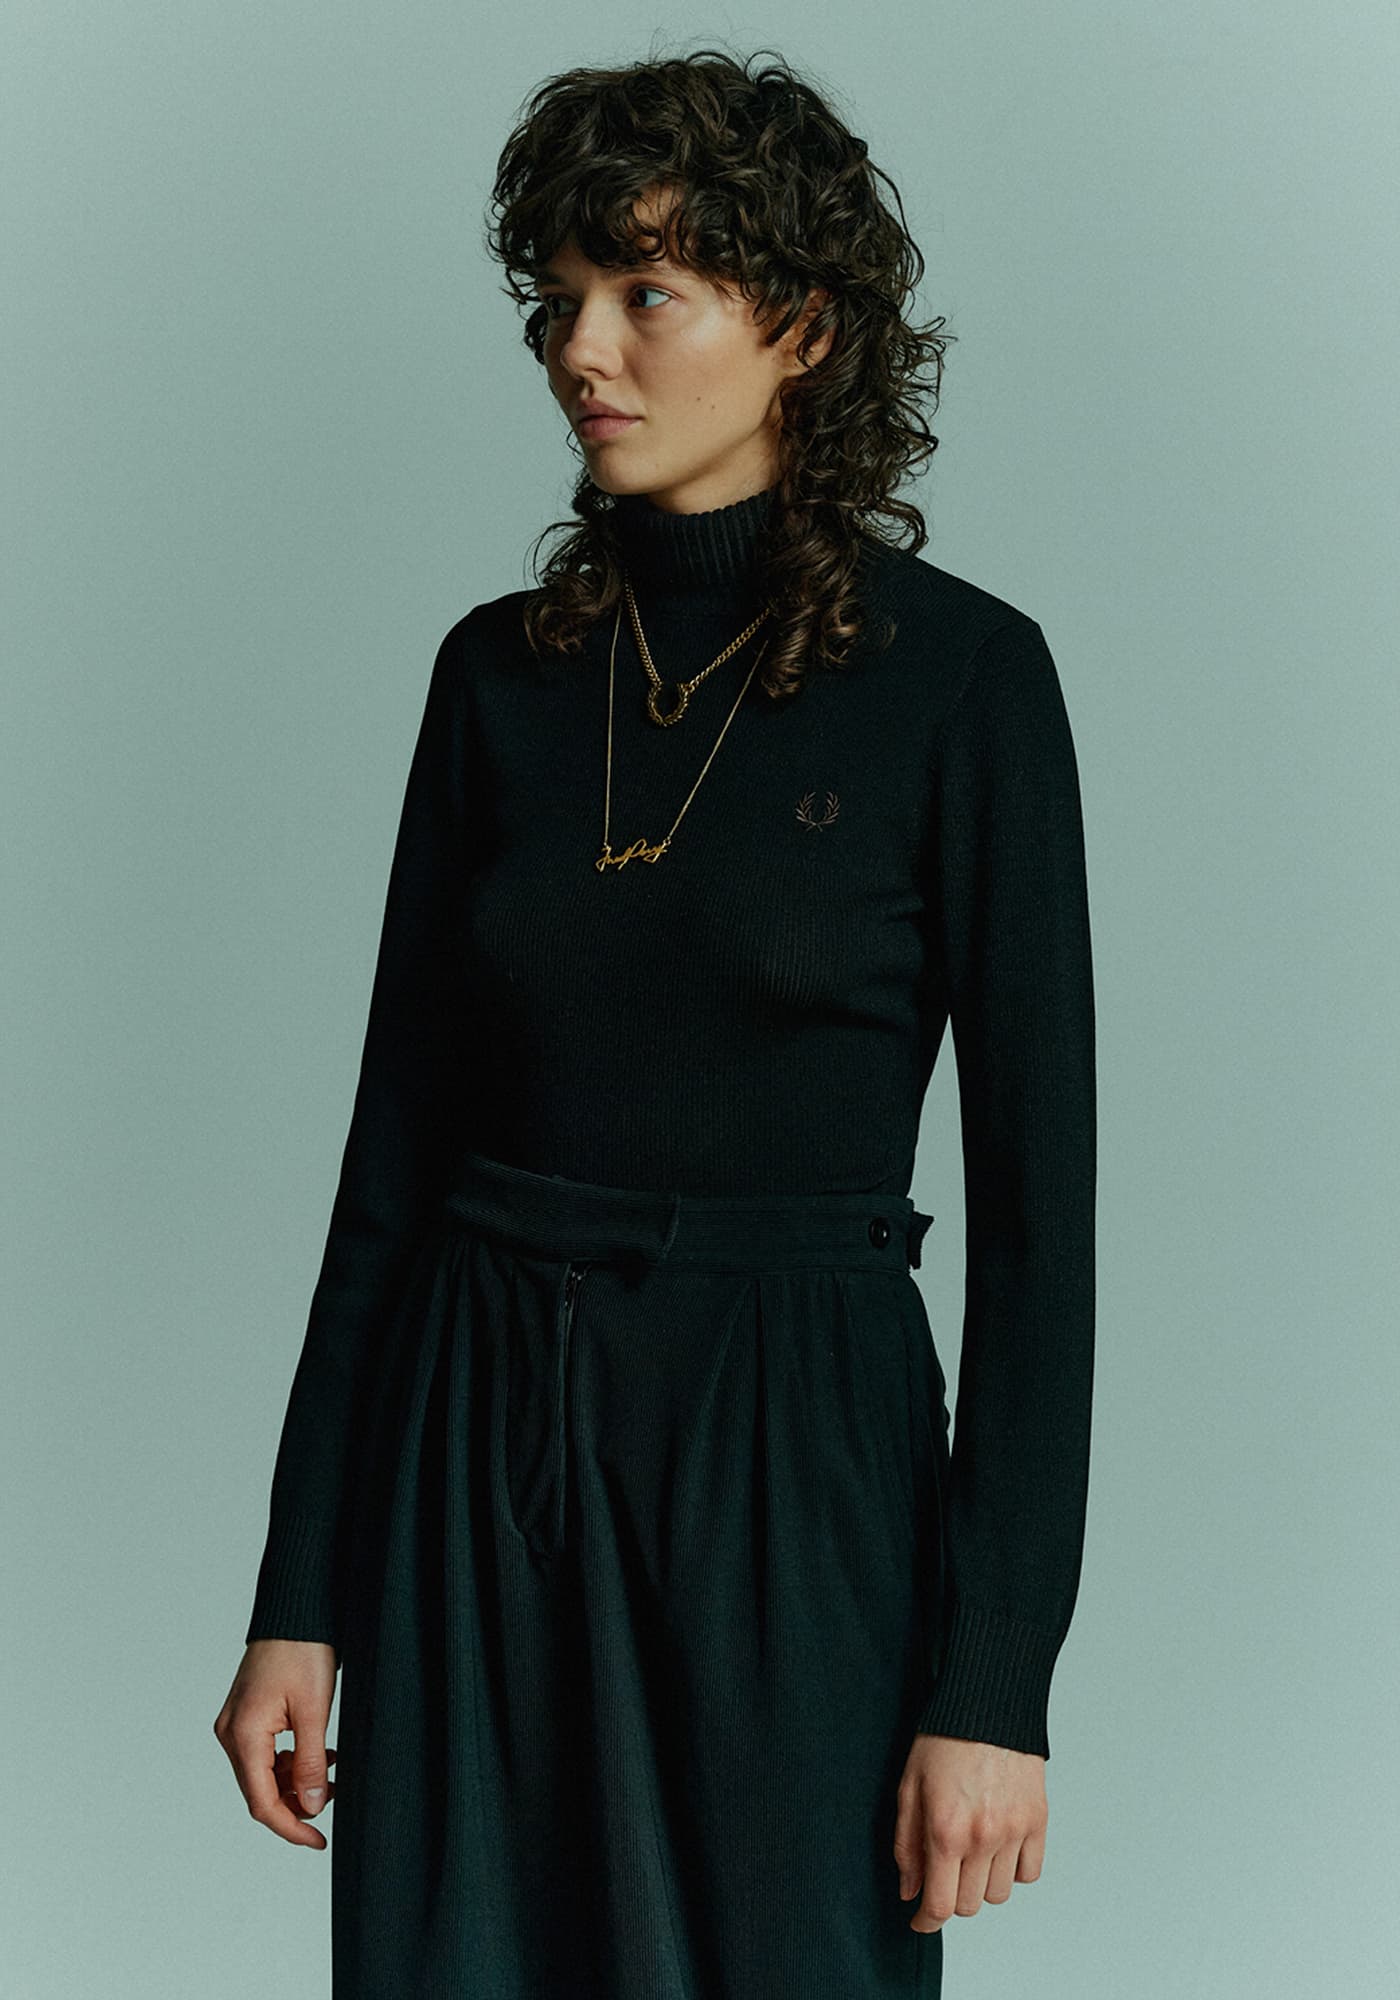 Laurel Wreath And Fp Necklace|FRED PERRY(フレッドペリー)の通販